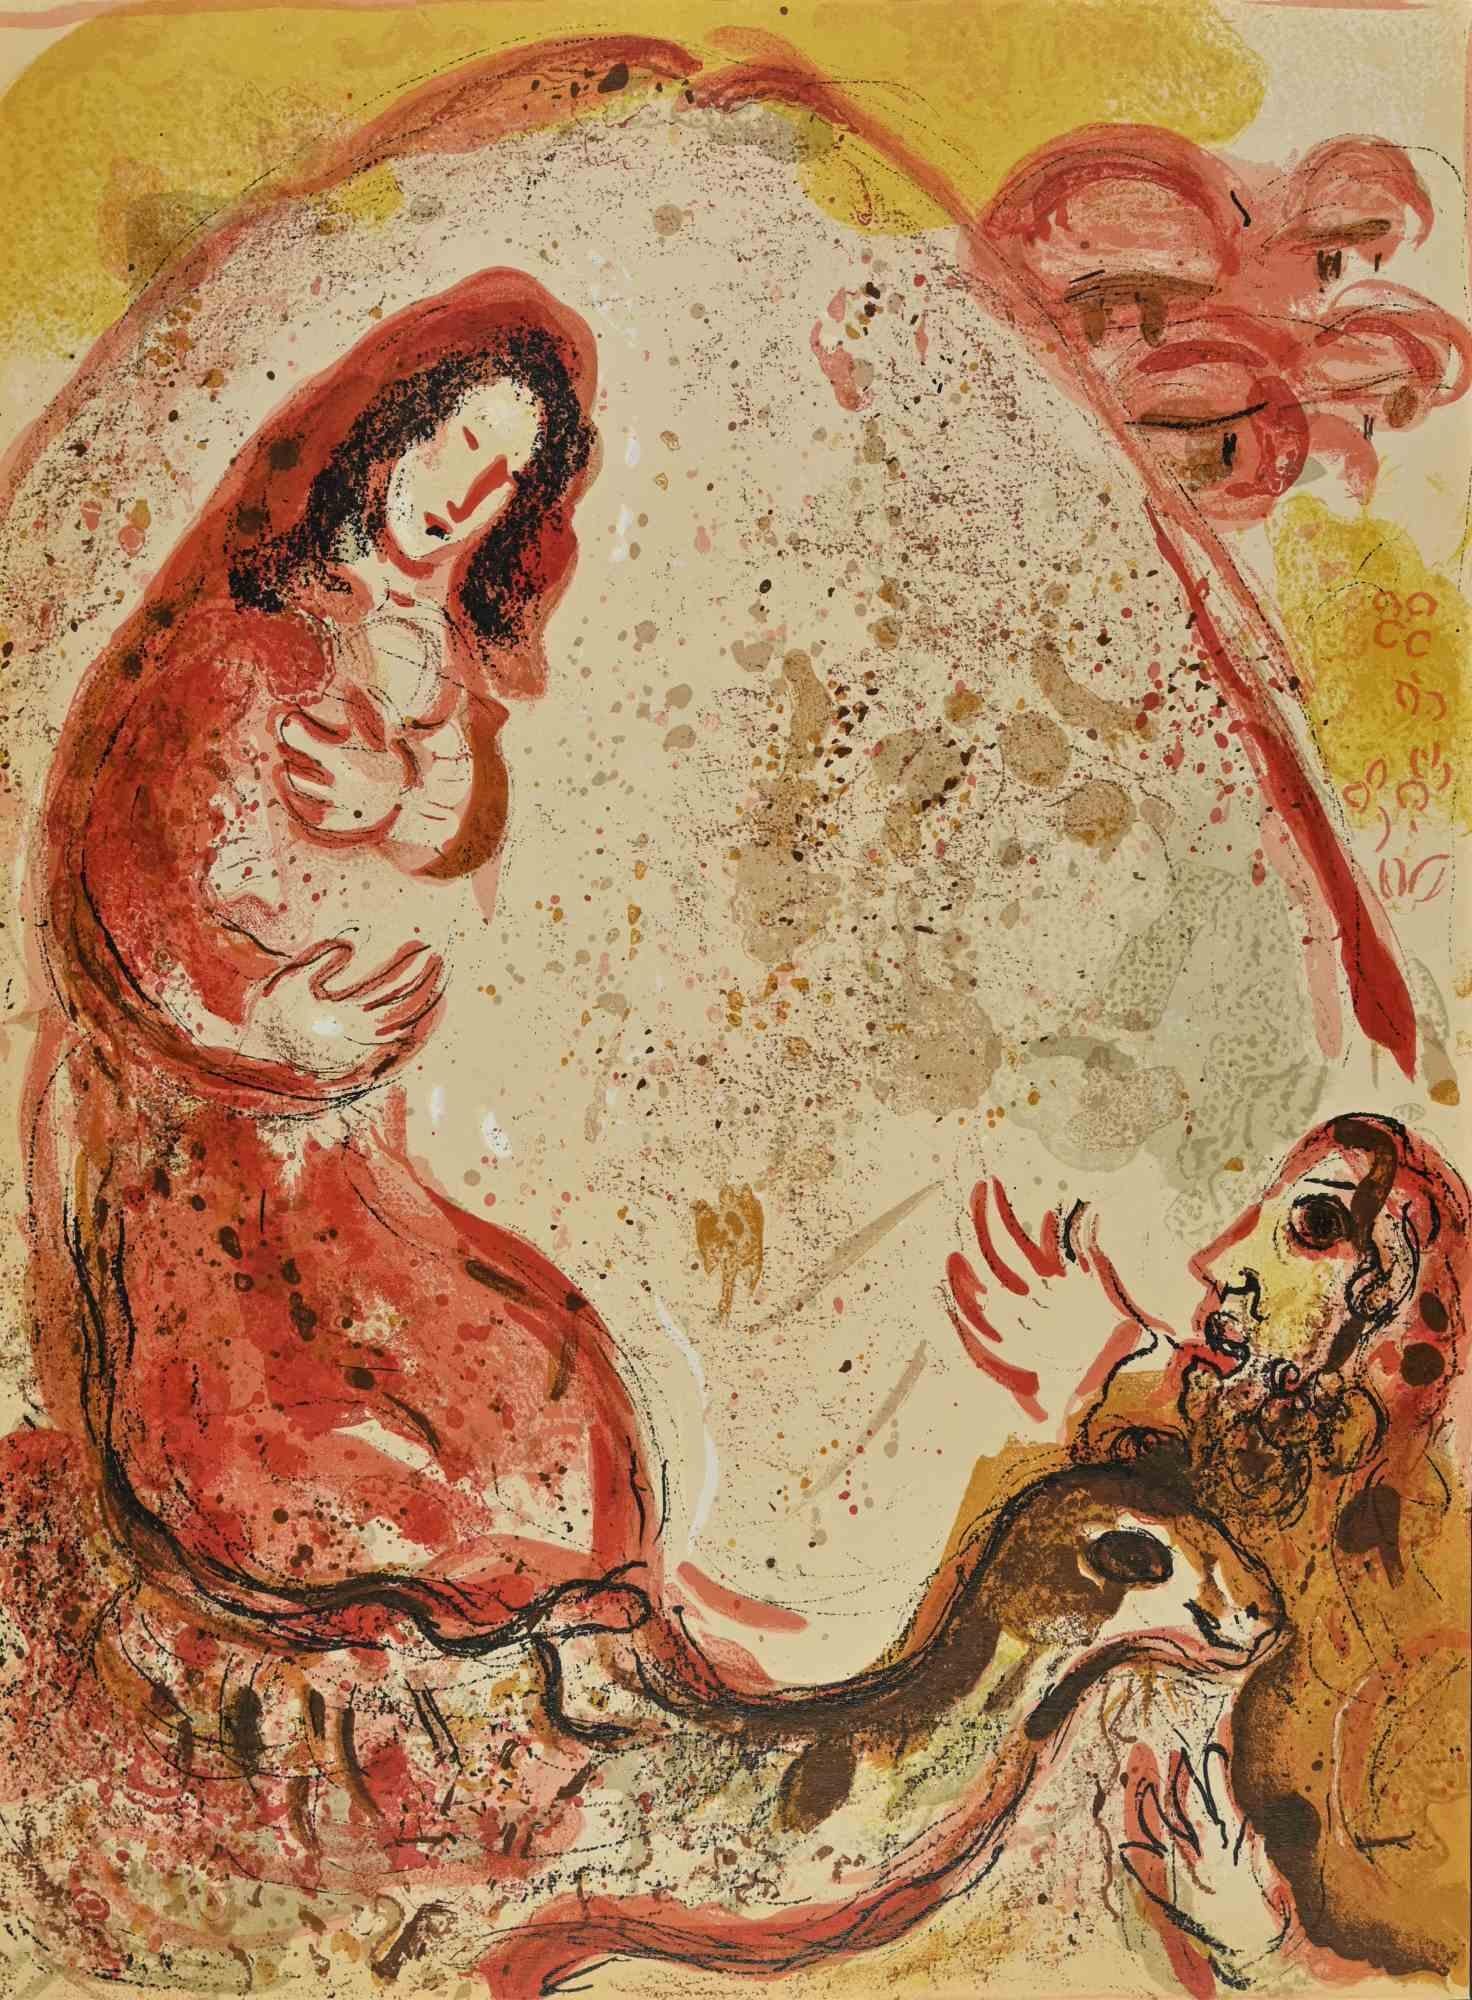 Rachel hides her father's housold gods  is a an artwork from the Series "The Bible", realized by Marc Chagall in 1960.

Mixed colored lithograph on brown-toned paper, no signature.

Edition of 6500 unsigned lithographs. Printed by Mourlot and